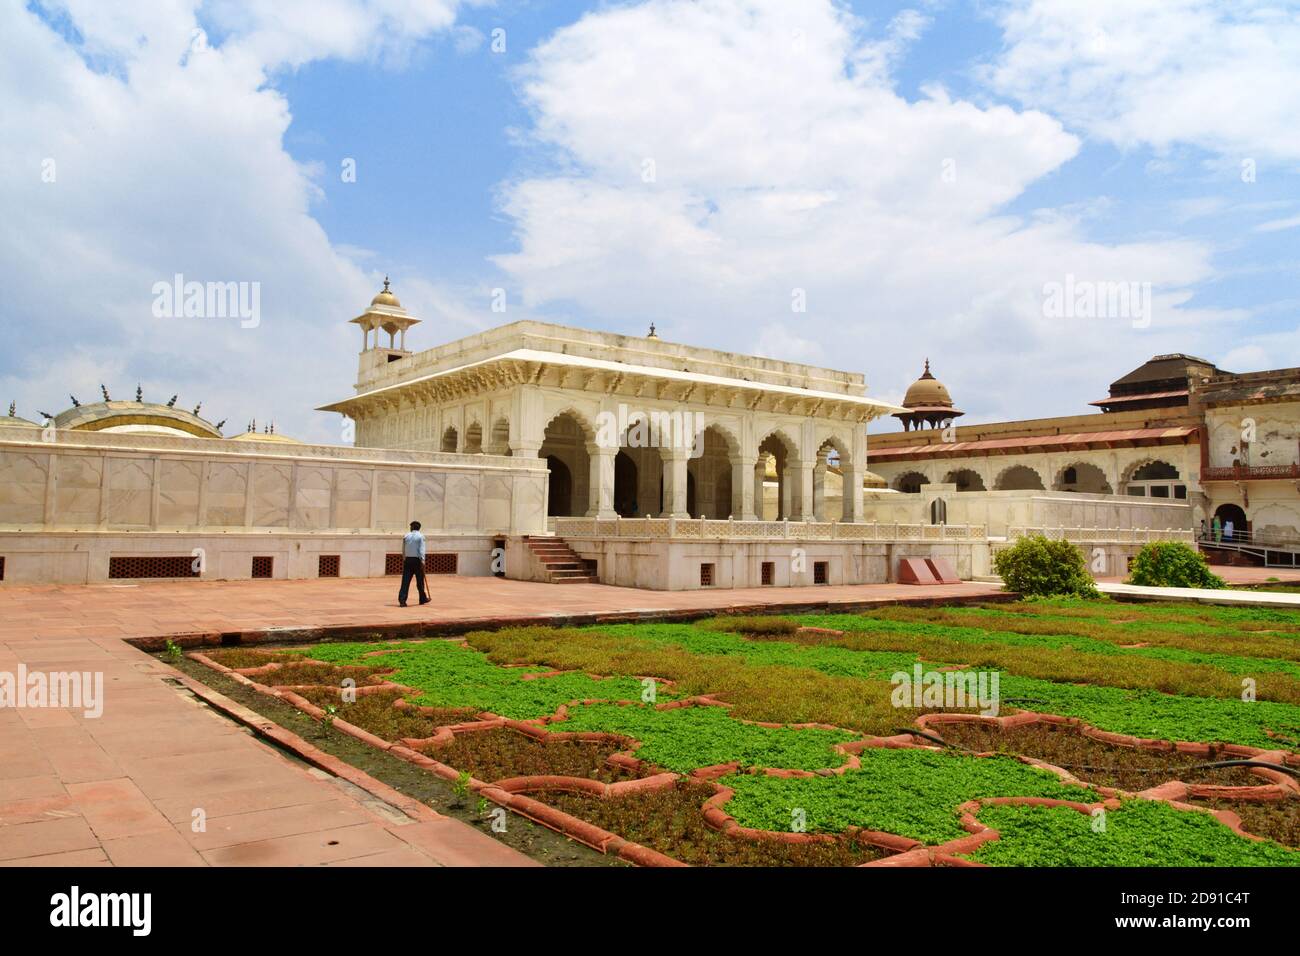 Agra, India - August 18, 2016: Khas Mahal covered by white marble was the palace of the emperor inside Agra Fort in Agra, Uttar Pradesh, India. The Ag Stock Photo